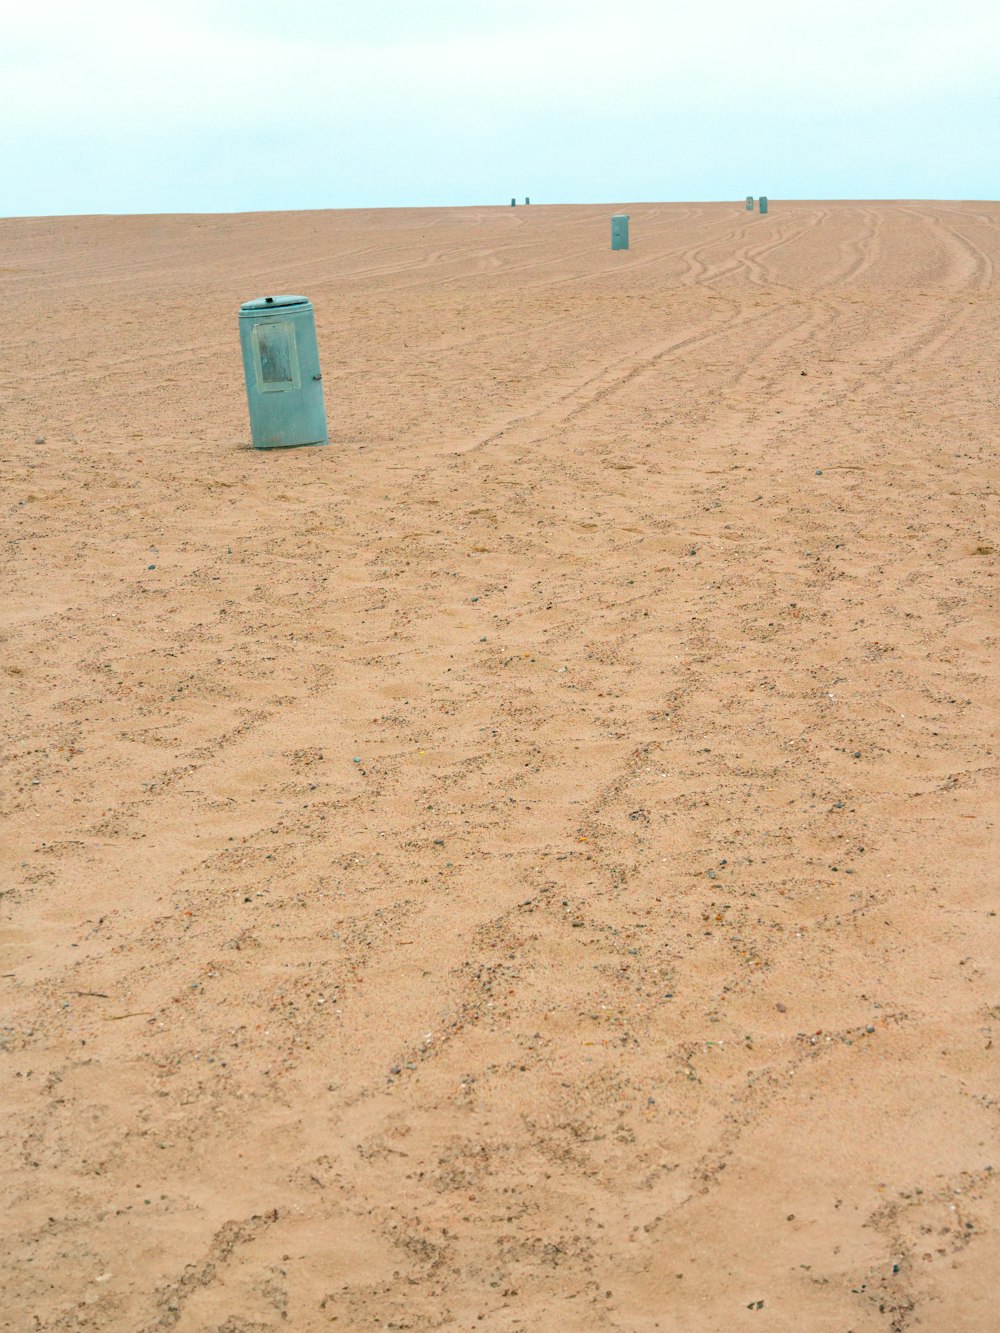 a blue trash can sitting in the middle of a desert